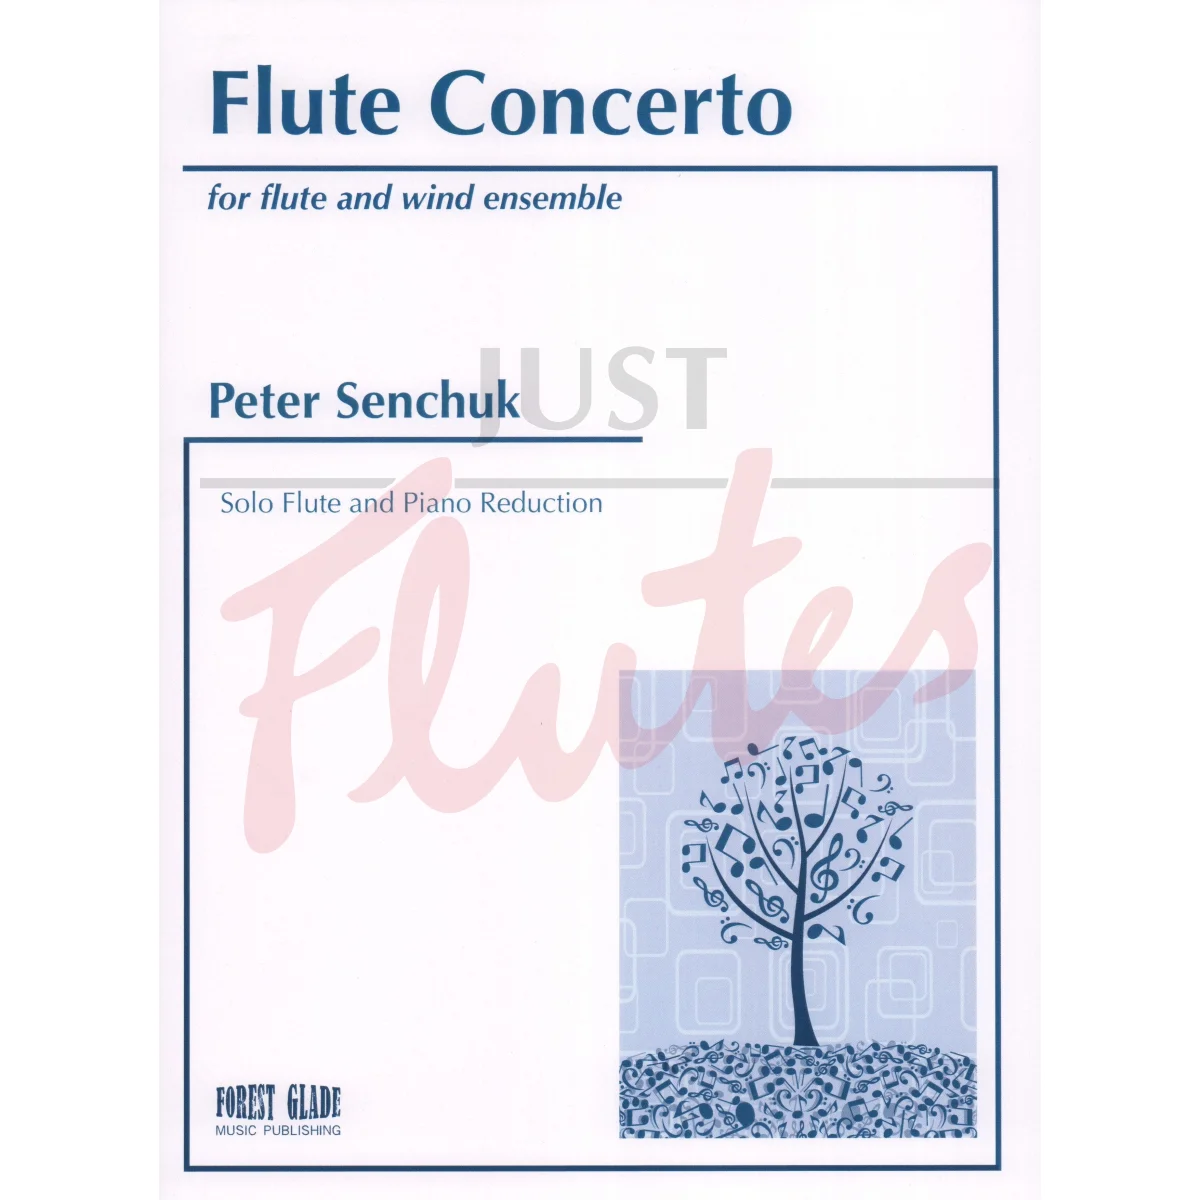 Flute Concerto arranged for Flute and Piano